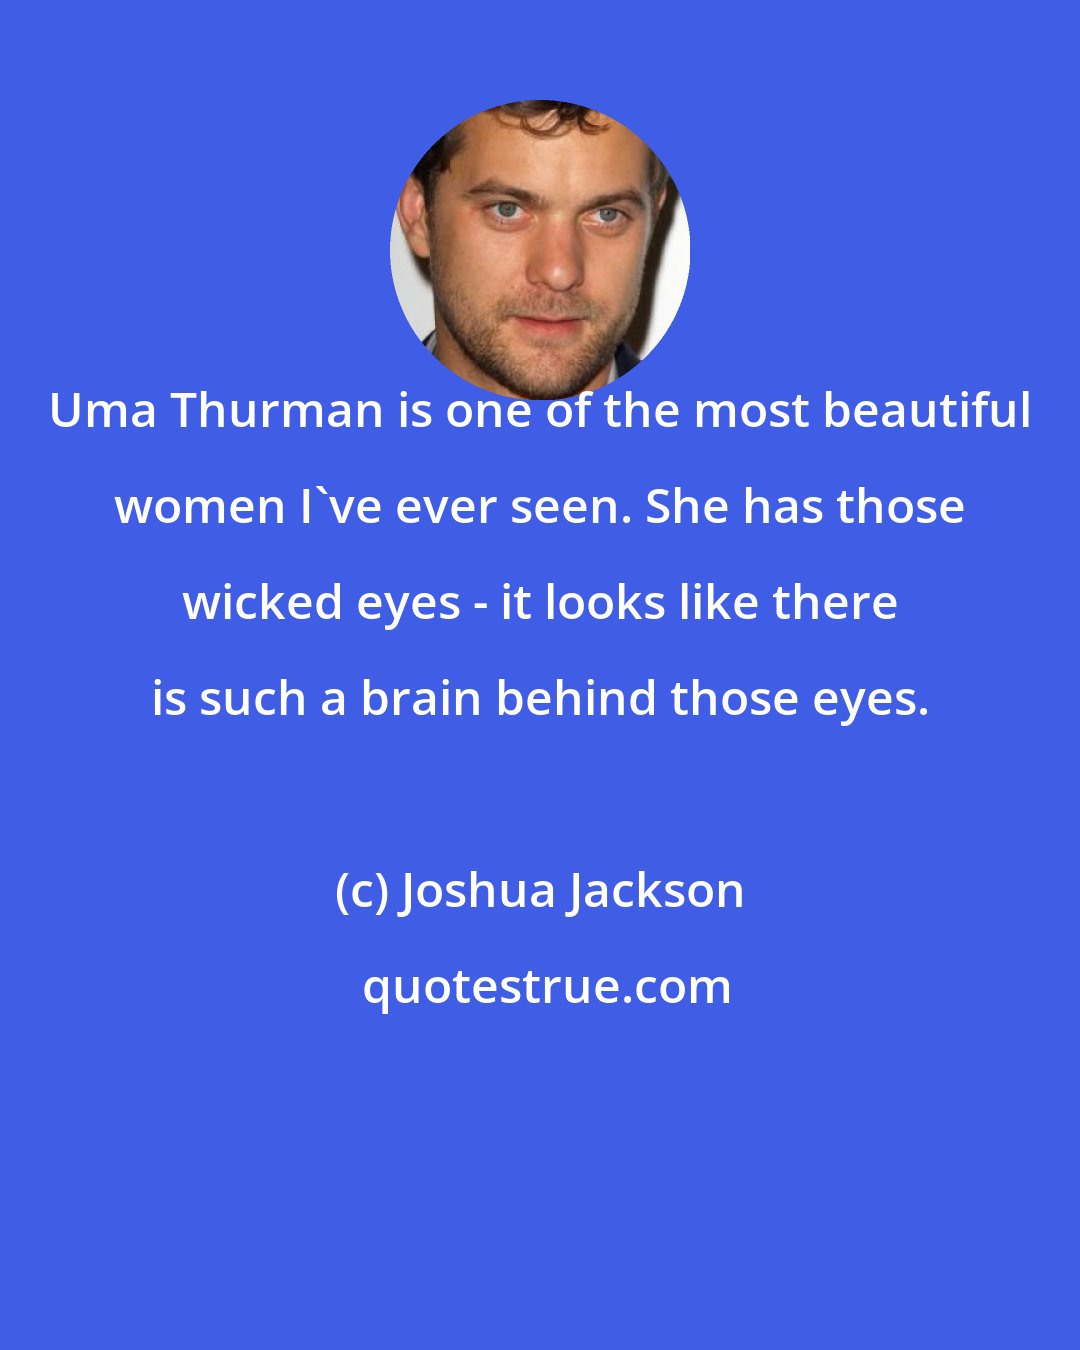 Joshua Jackson: Uma Thurman is one of the most beautiful women I've ever seen. She has those wicked eyes - it looks like there is such a brain behind those eyes.